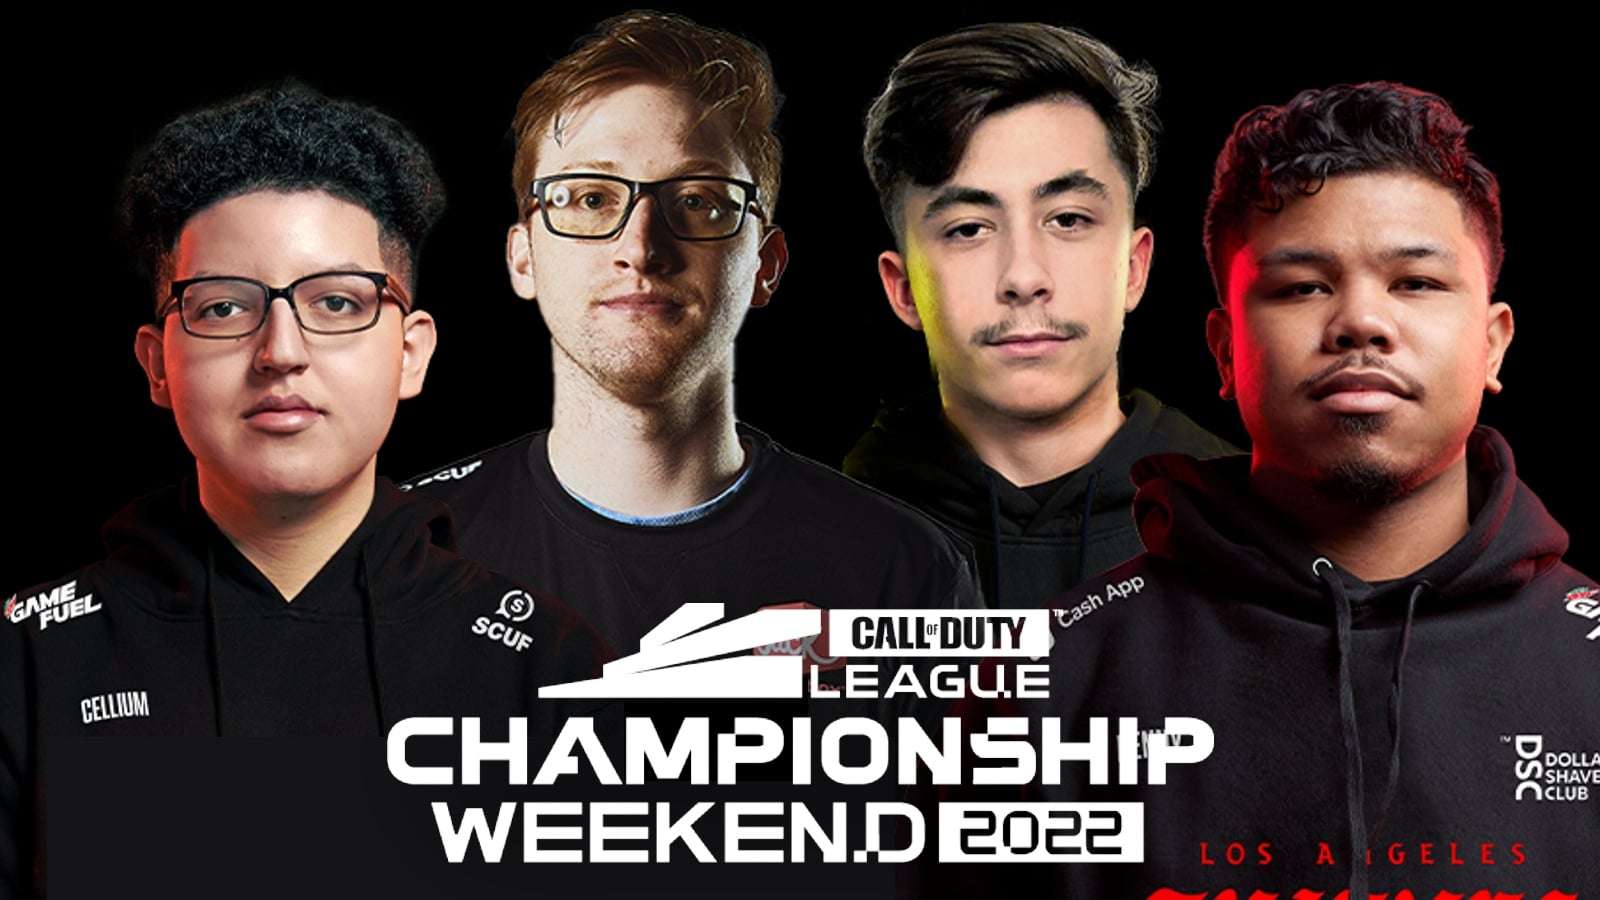 cdl champs weekend poster with cellium, scump, hydra and kenny